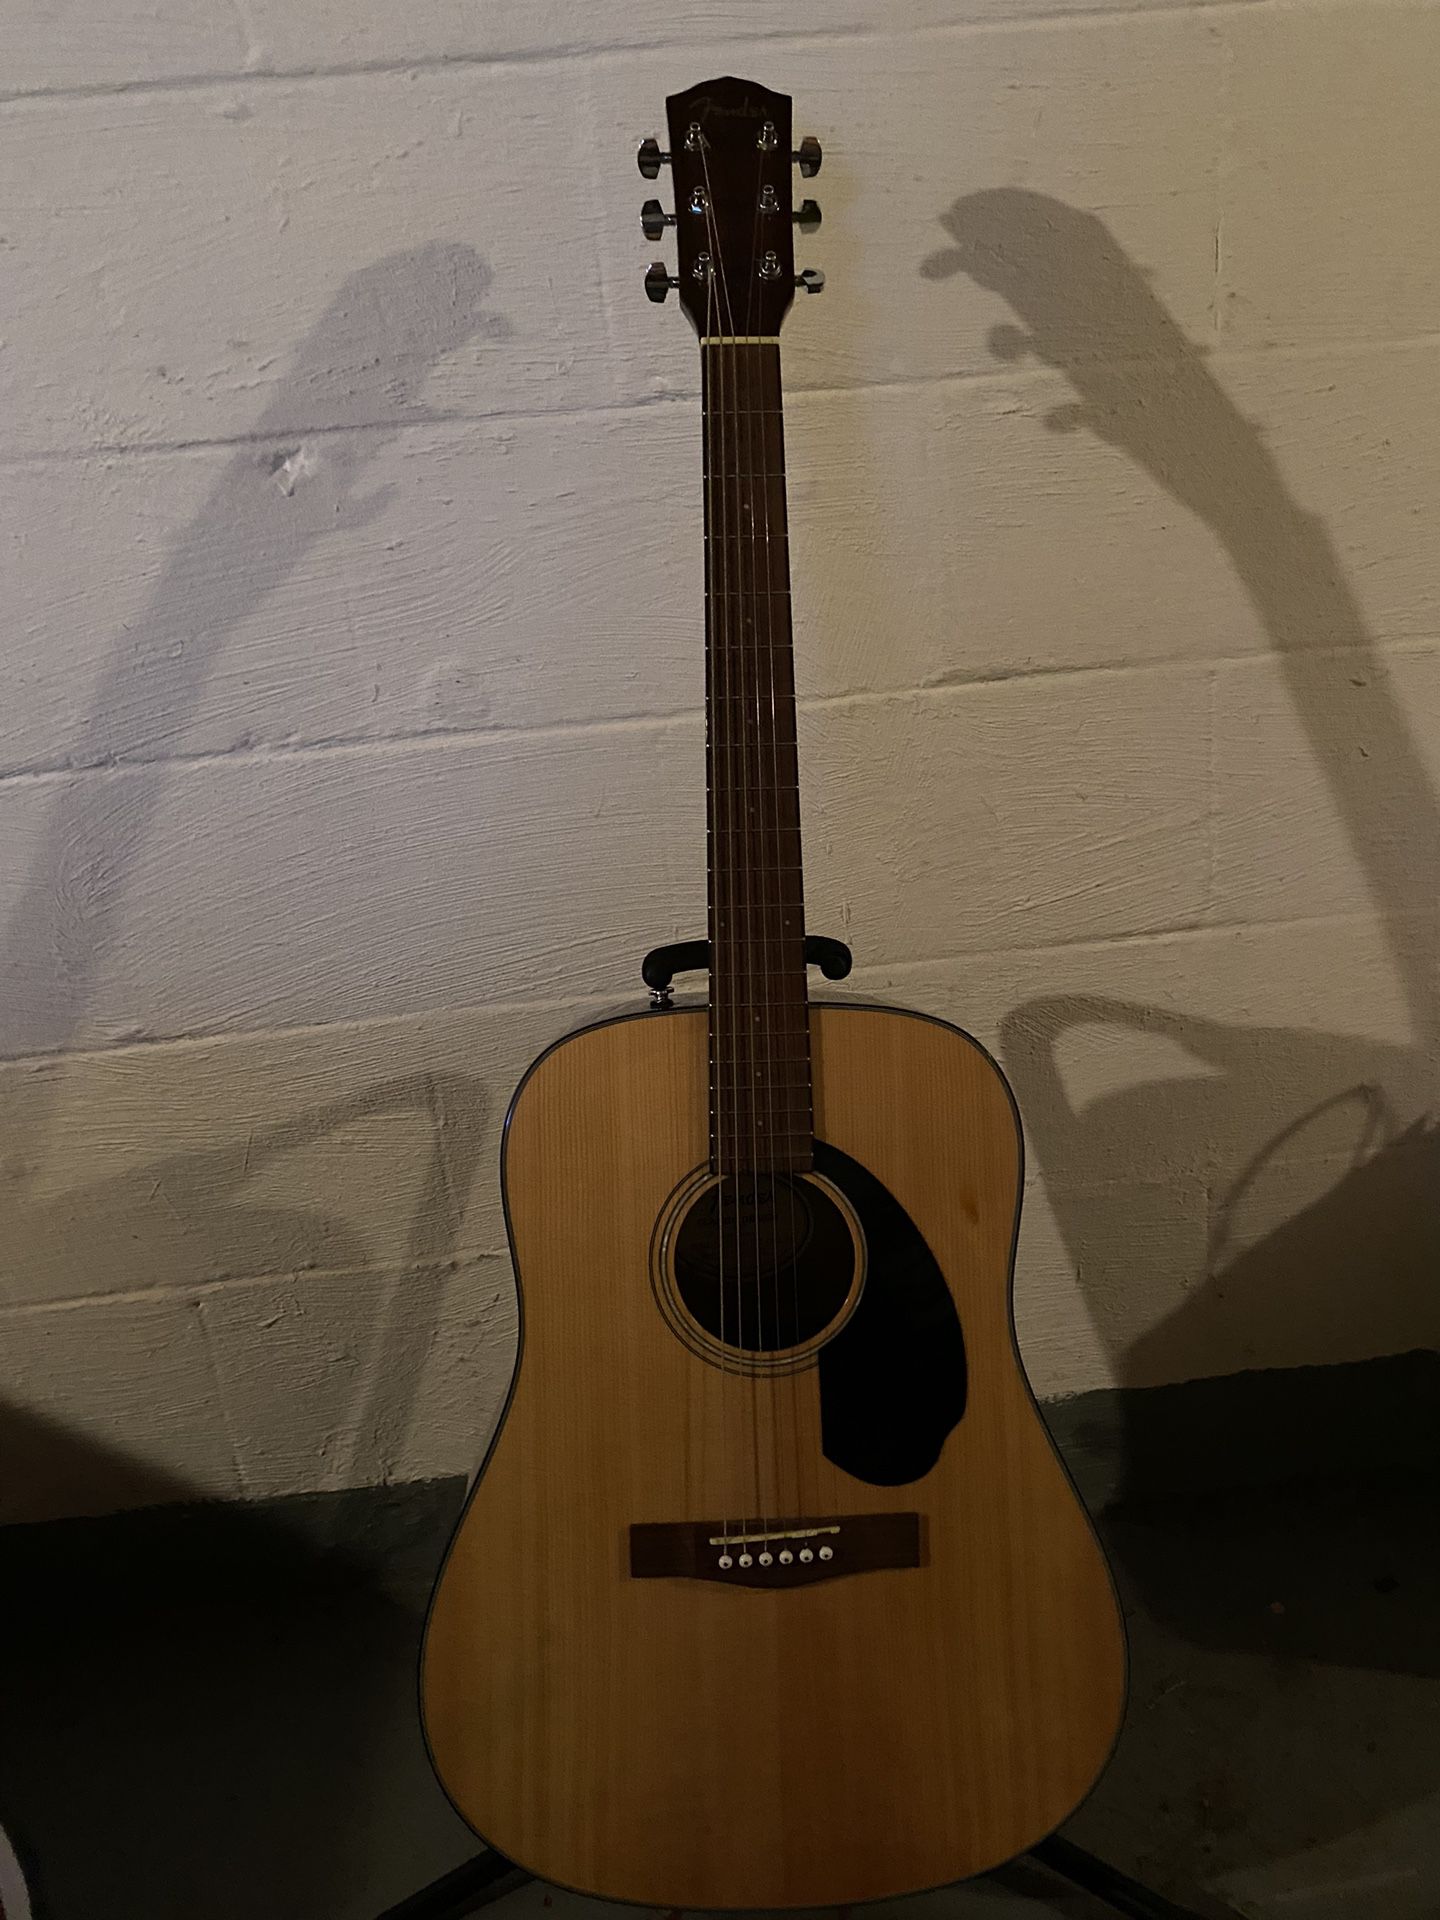 Fender CD-60s Dreadnought Acoustic Guitar with stand